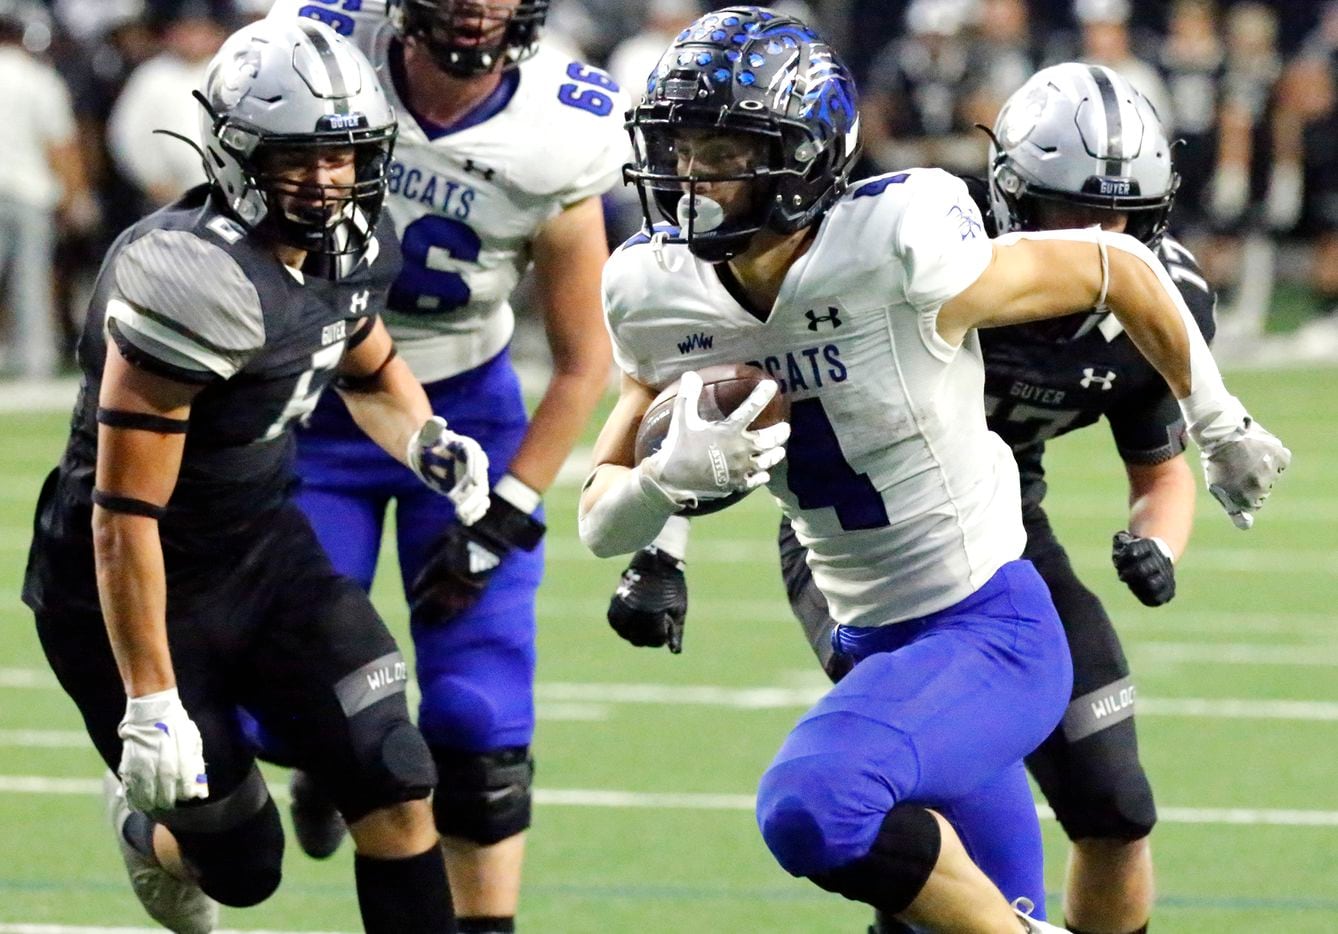 Byron Nelson High School running back Michael Giordano (4) outruns Guyer High School linebacker Wally Sagui (6) and Guyer High School linebacker Brooks Etheridge (17) to the end zone during the first half as Denton Guyer High School played Trophy Club Byron Nelson High School in a Class 6A Division II Region I semifinal football game at The Ford Center in Frisco on Saturday, November 27, 2021. (Stewart F. House/Special Contributor)